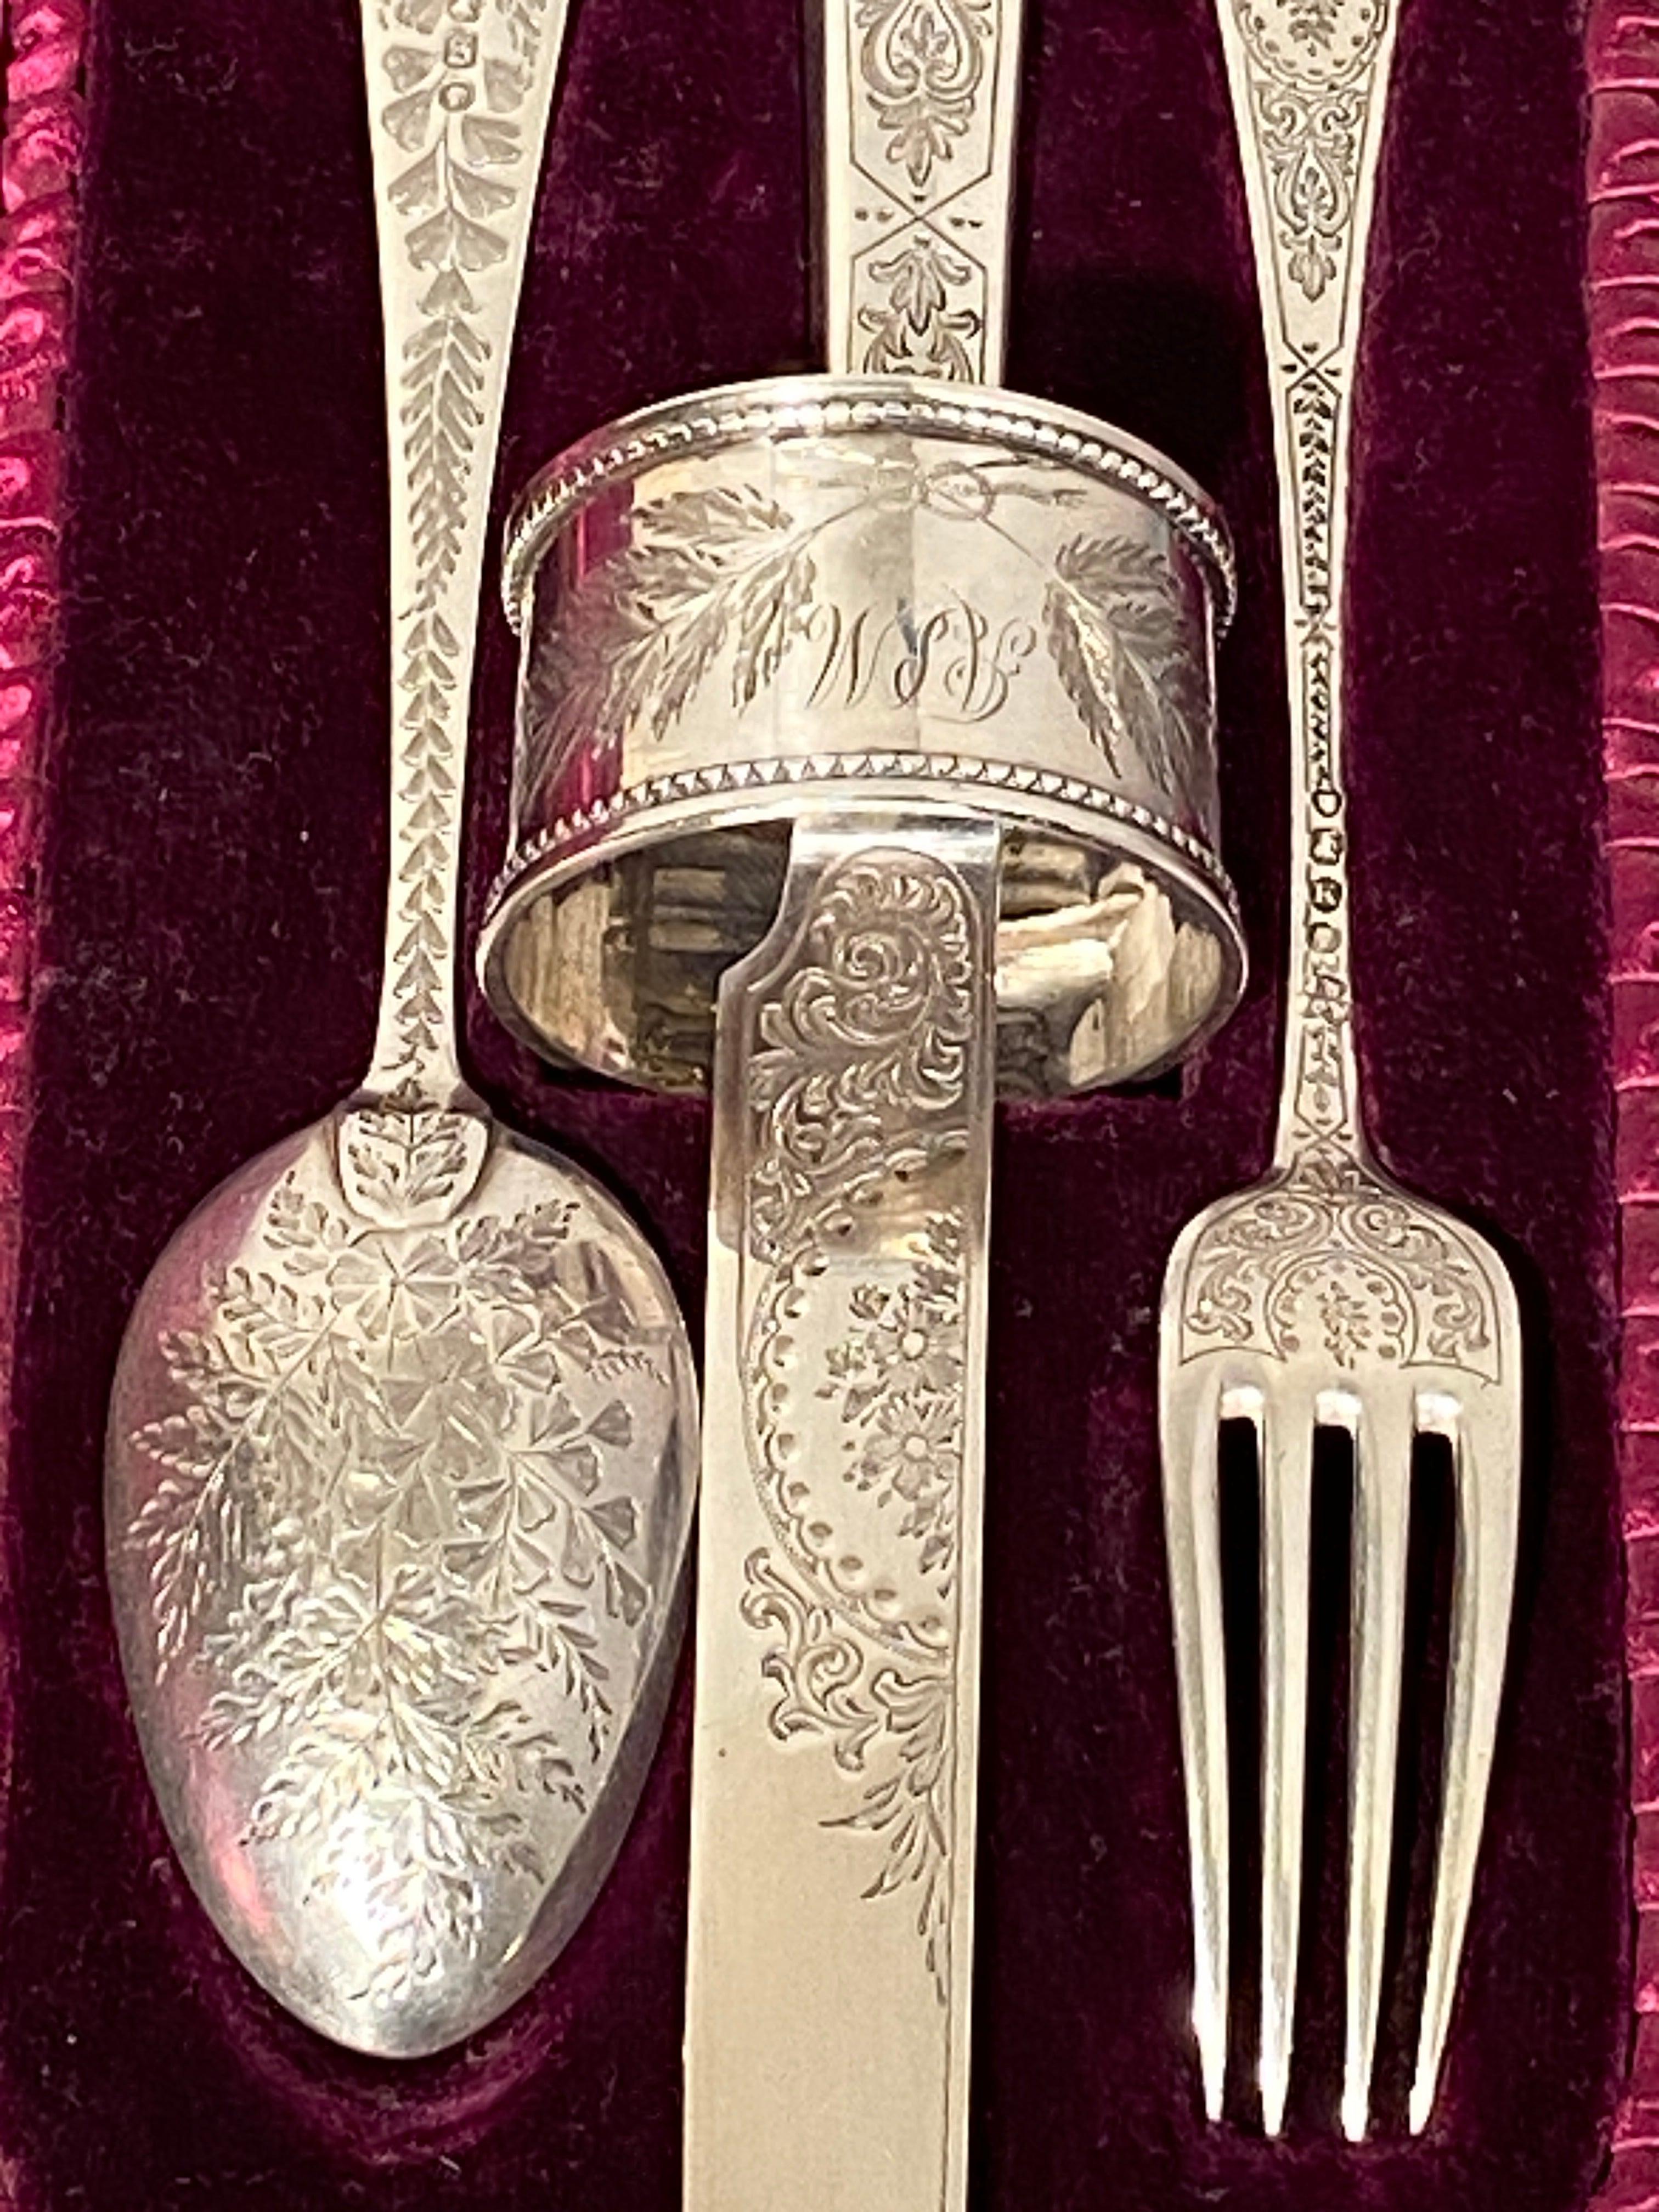 Silver Christening Set Edward Barnard & Sons Engraved ASM
A silver christening set consisting of spoon 1873 and napkin ring 1875 of one design and a fork 1885 and knife 1886 of another design. 
All assayed in London and boxed by Drummonds of